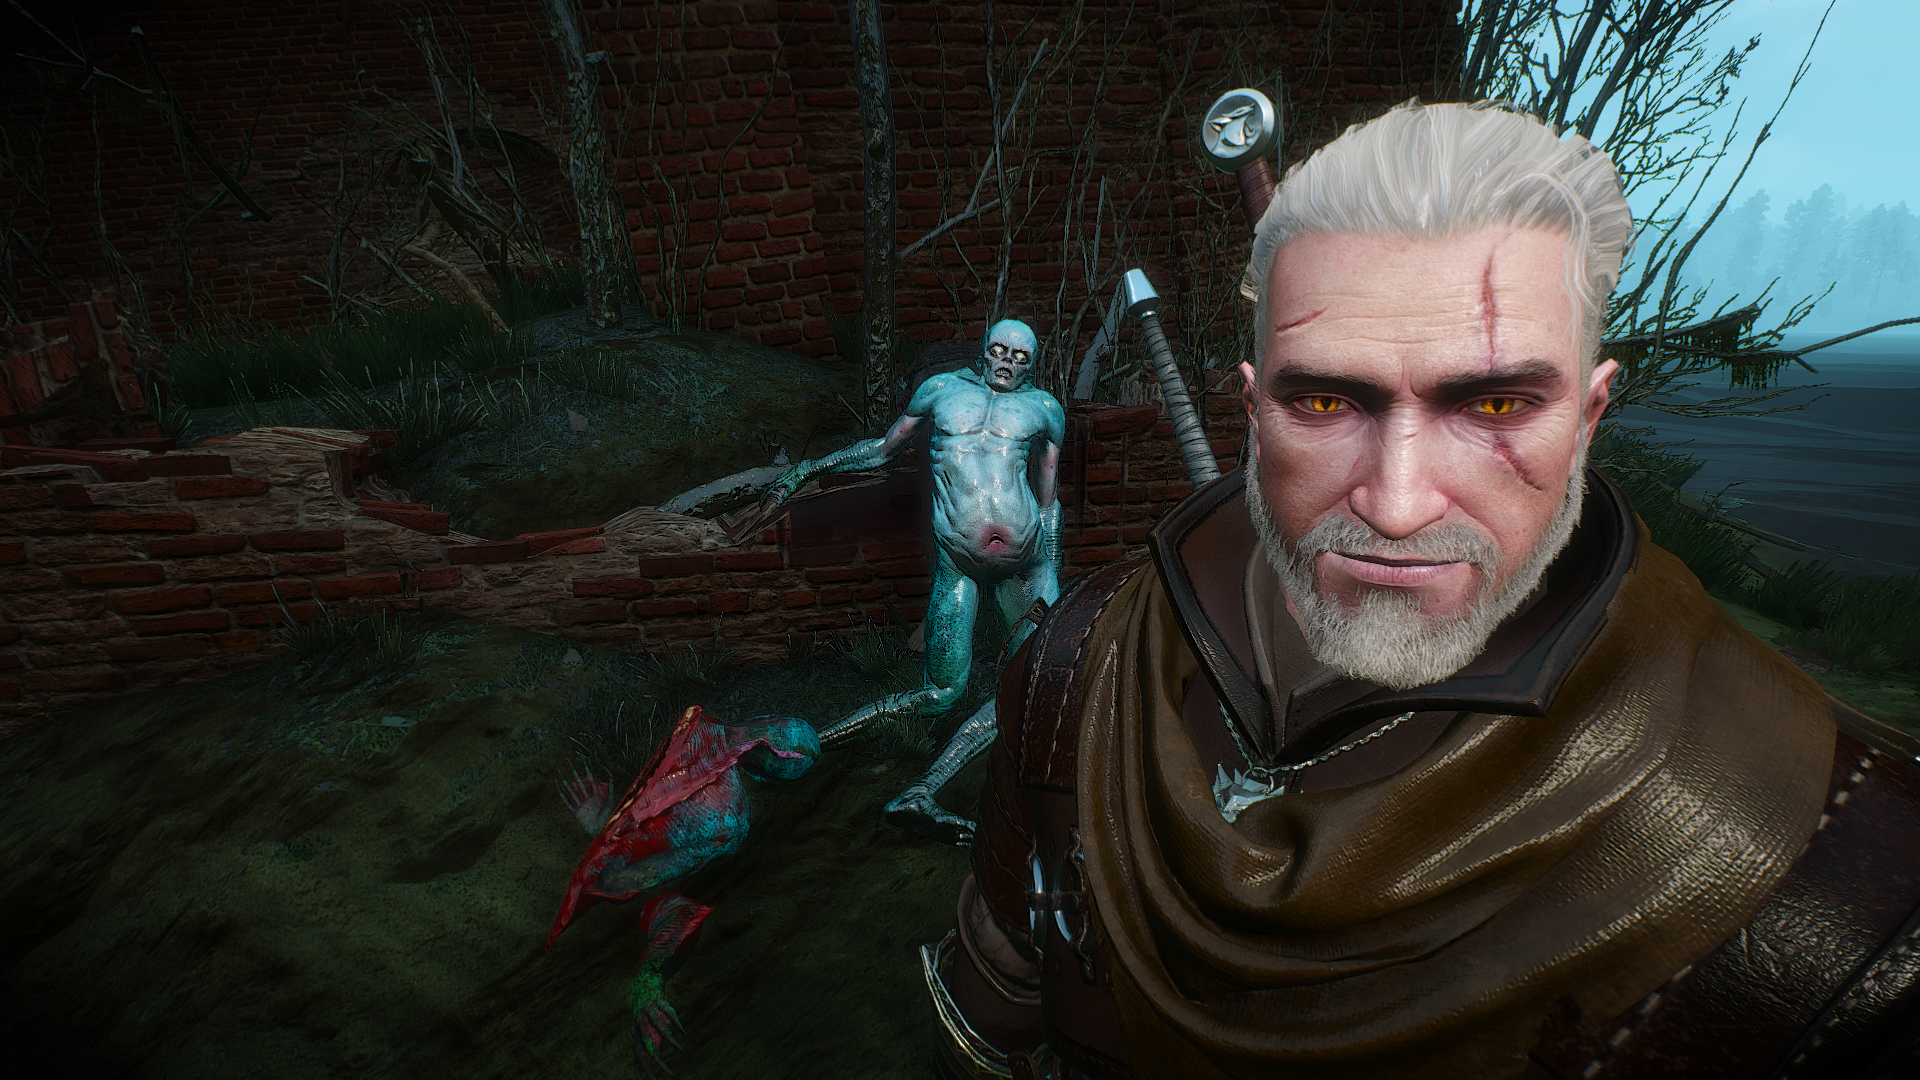 The Witcher The Witcher 3 The Witcher 3 Wild Hunt CD Projekt RED Geralt Of Rivia The White Wolf Smil 1920x1080